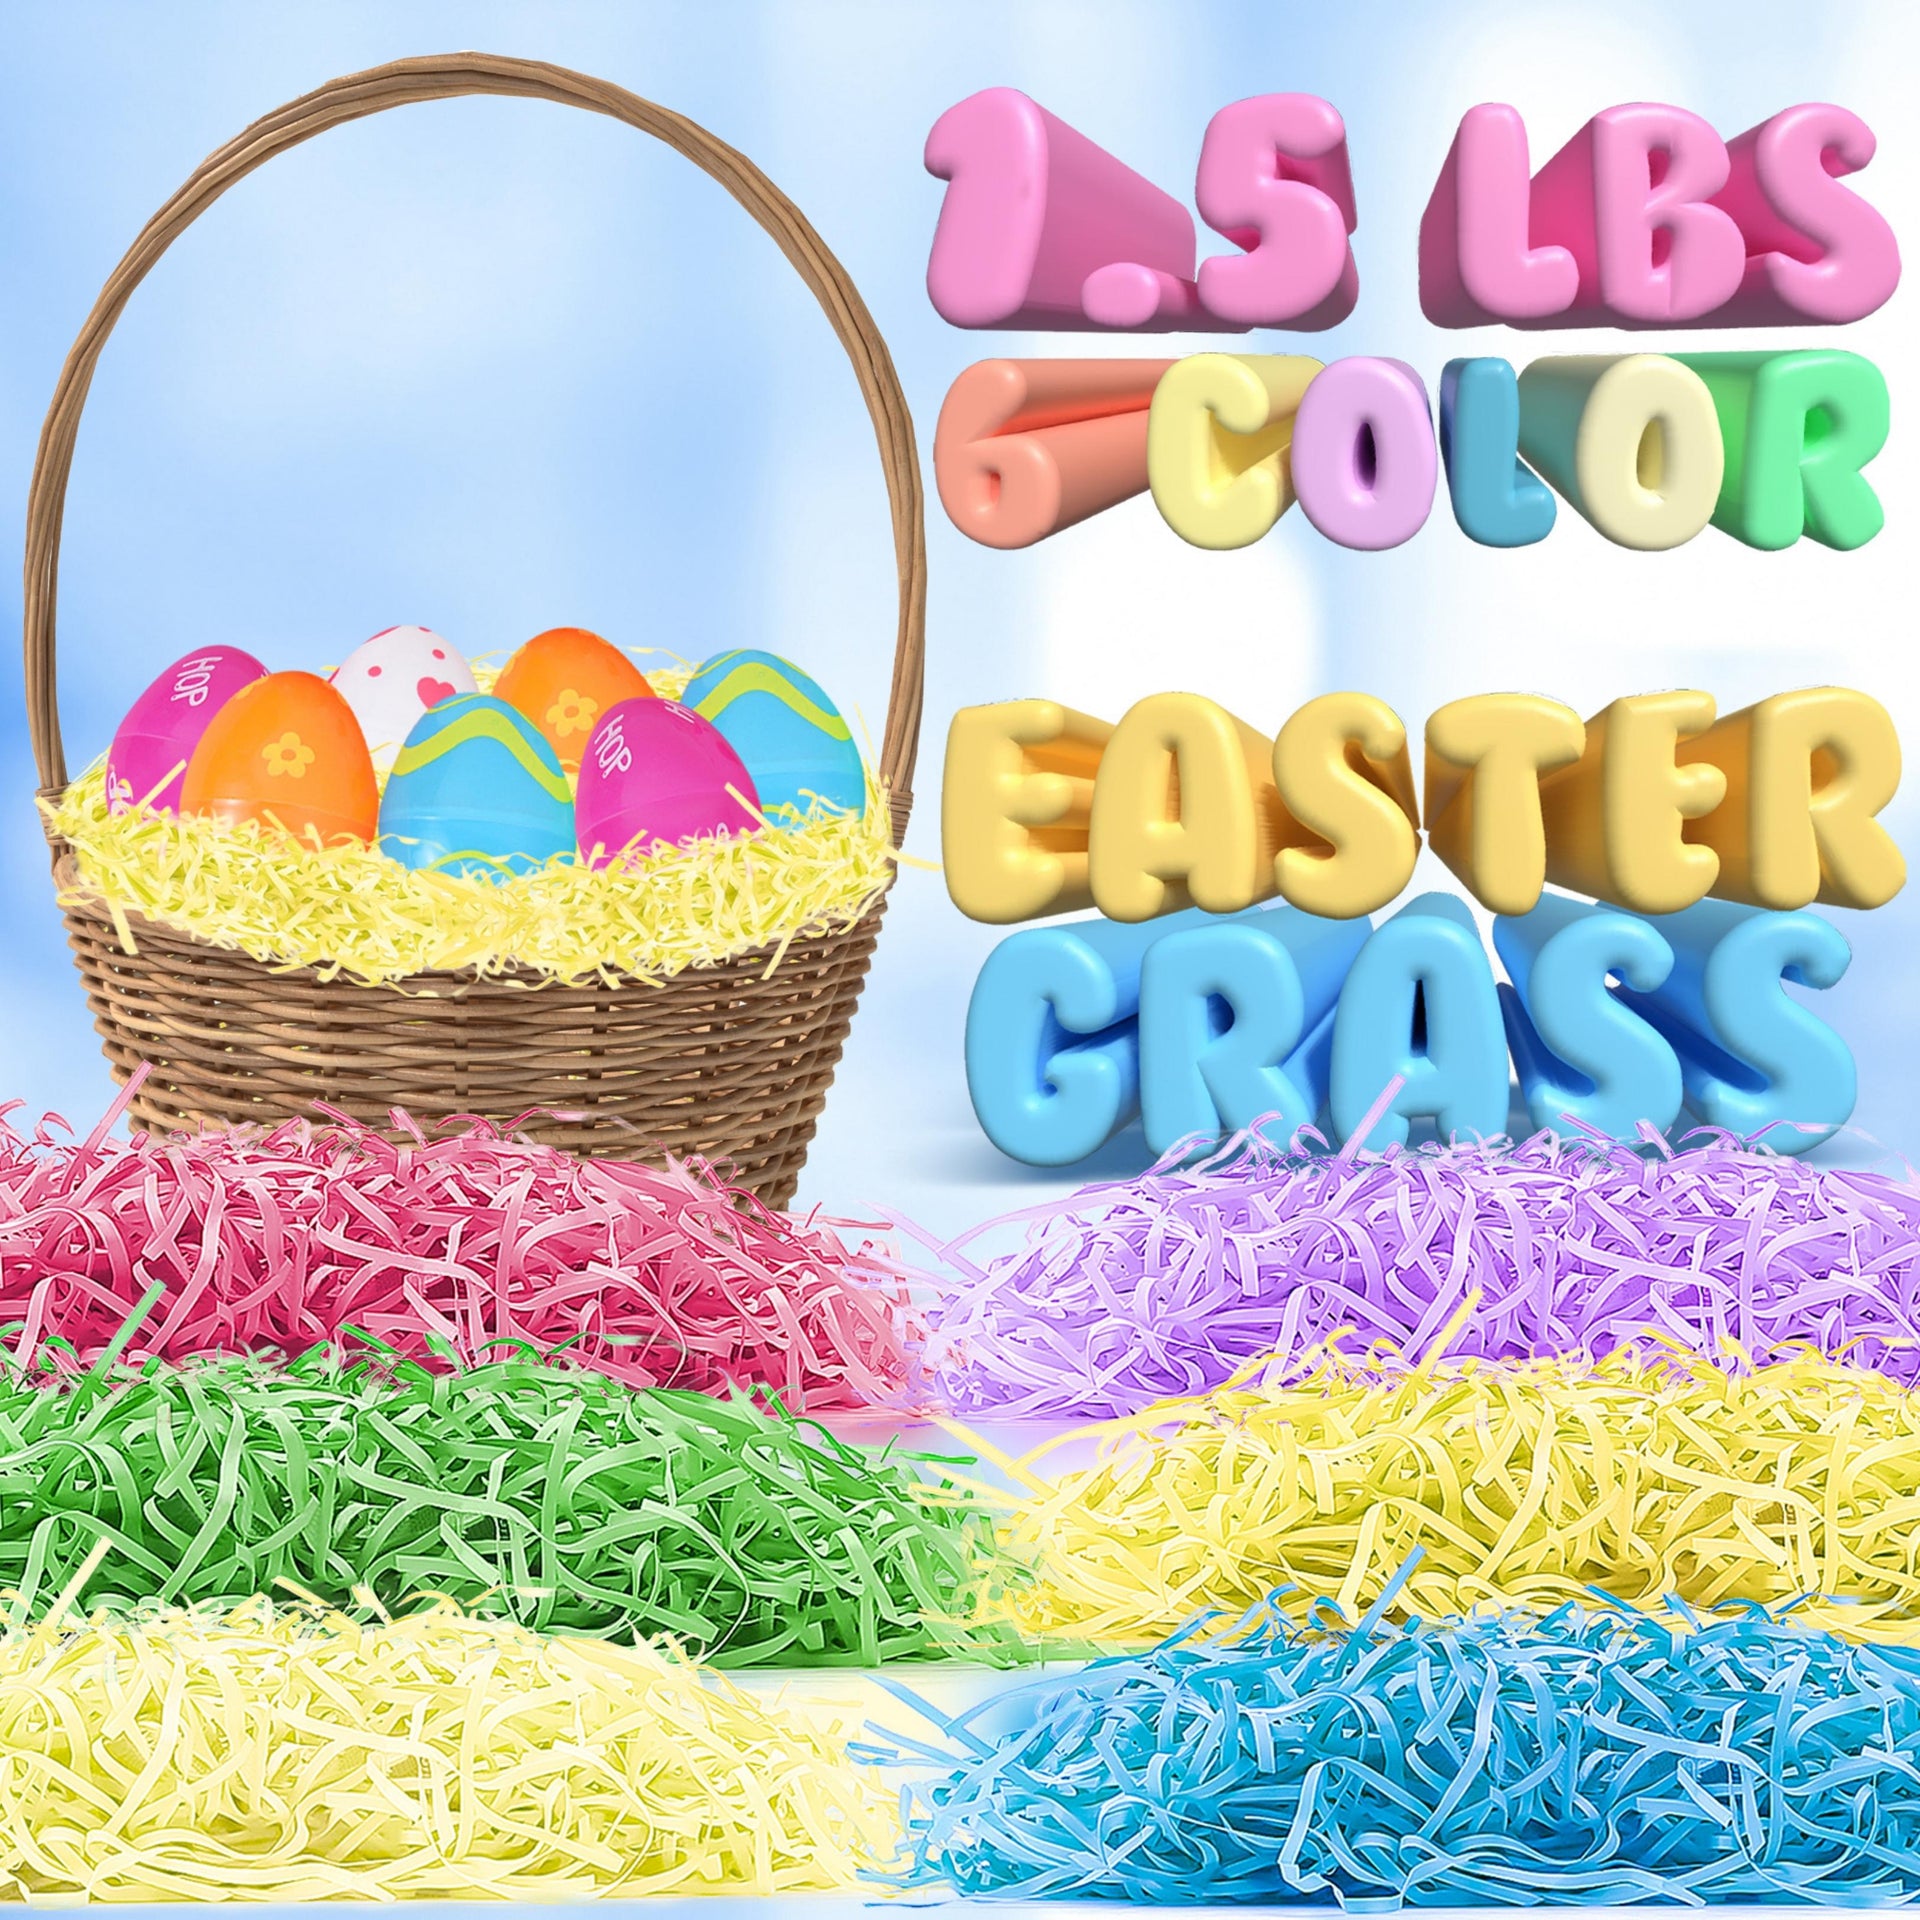 Easter Grass Recyclable Paper Shred (Pink, Yellow, Green) for Easter Eggs  Hunt, Easter Basket Grass Filler/Stuffers, Easter Theme Party Decoration